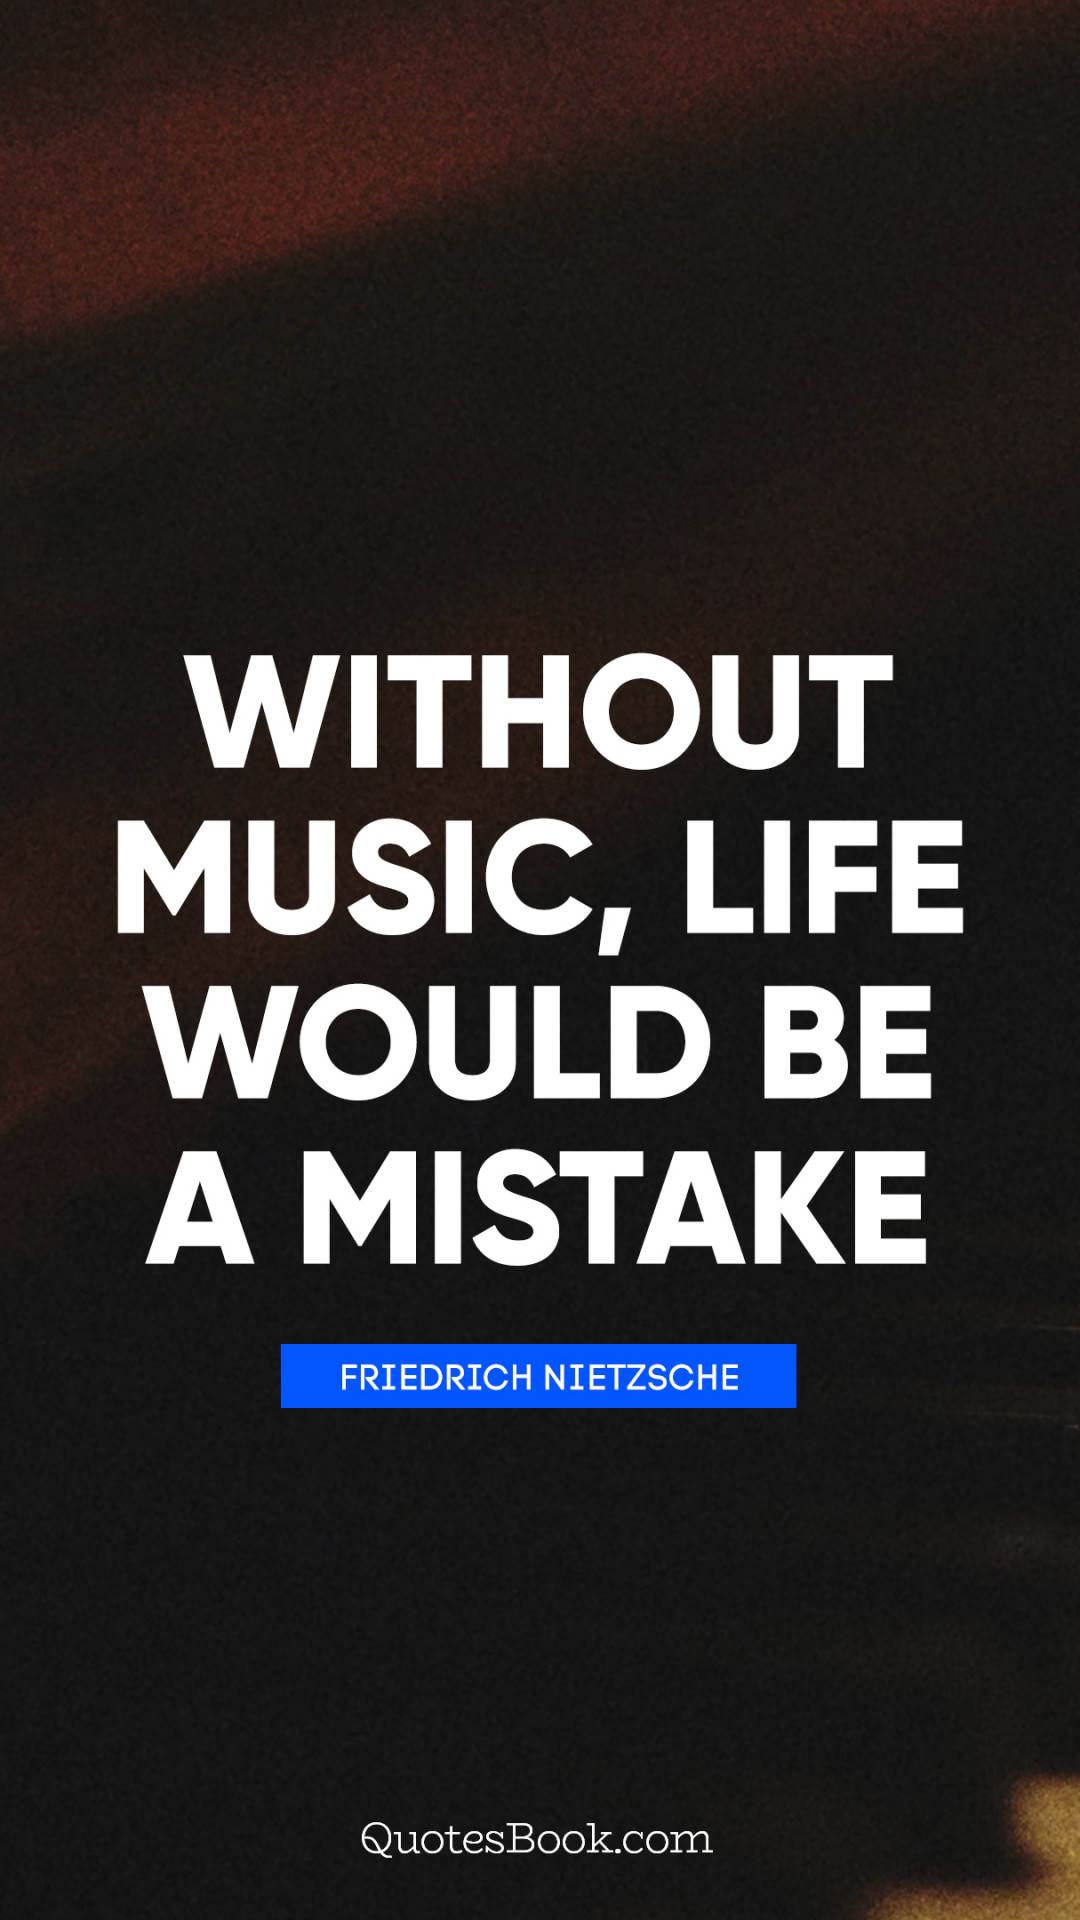 Without Music Life Would Be A Mistake 1 Inch 25mm Pin Button Badge Nietzsche 